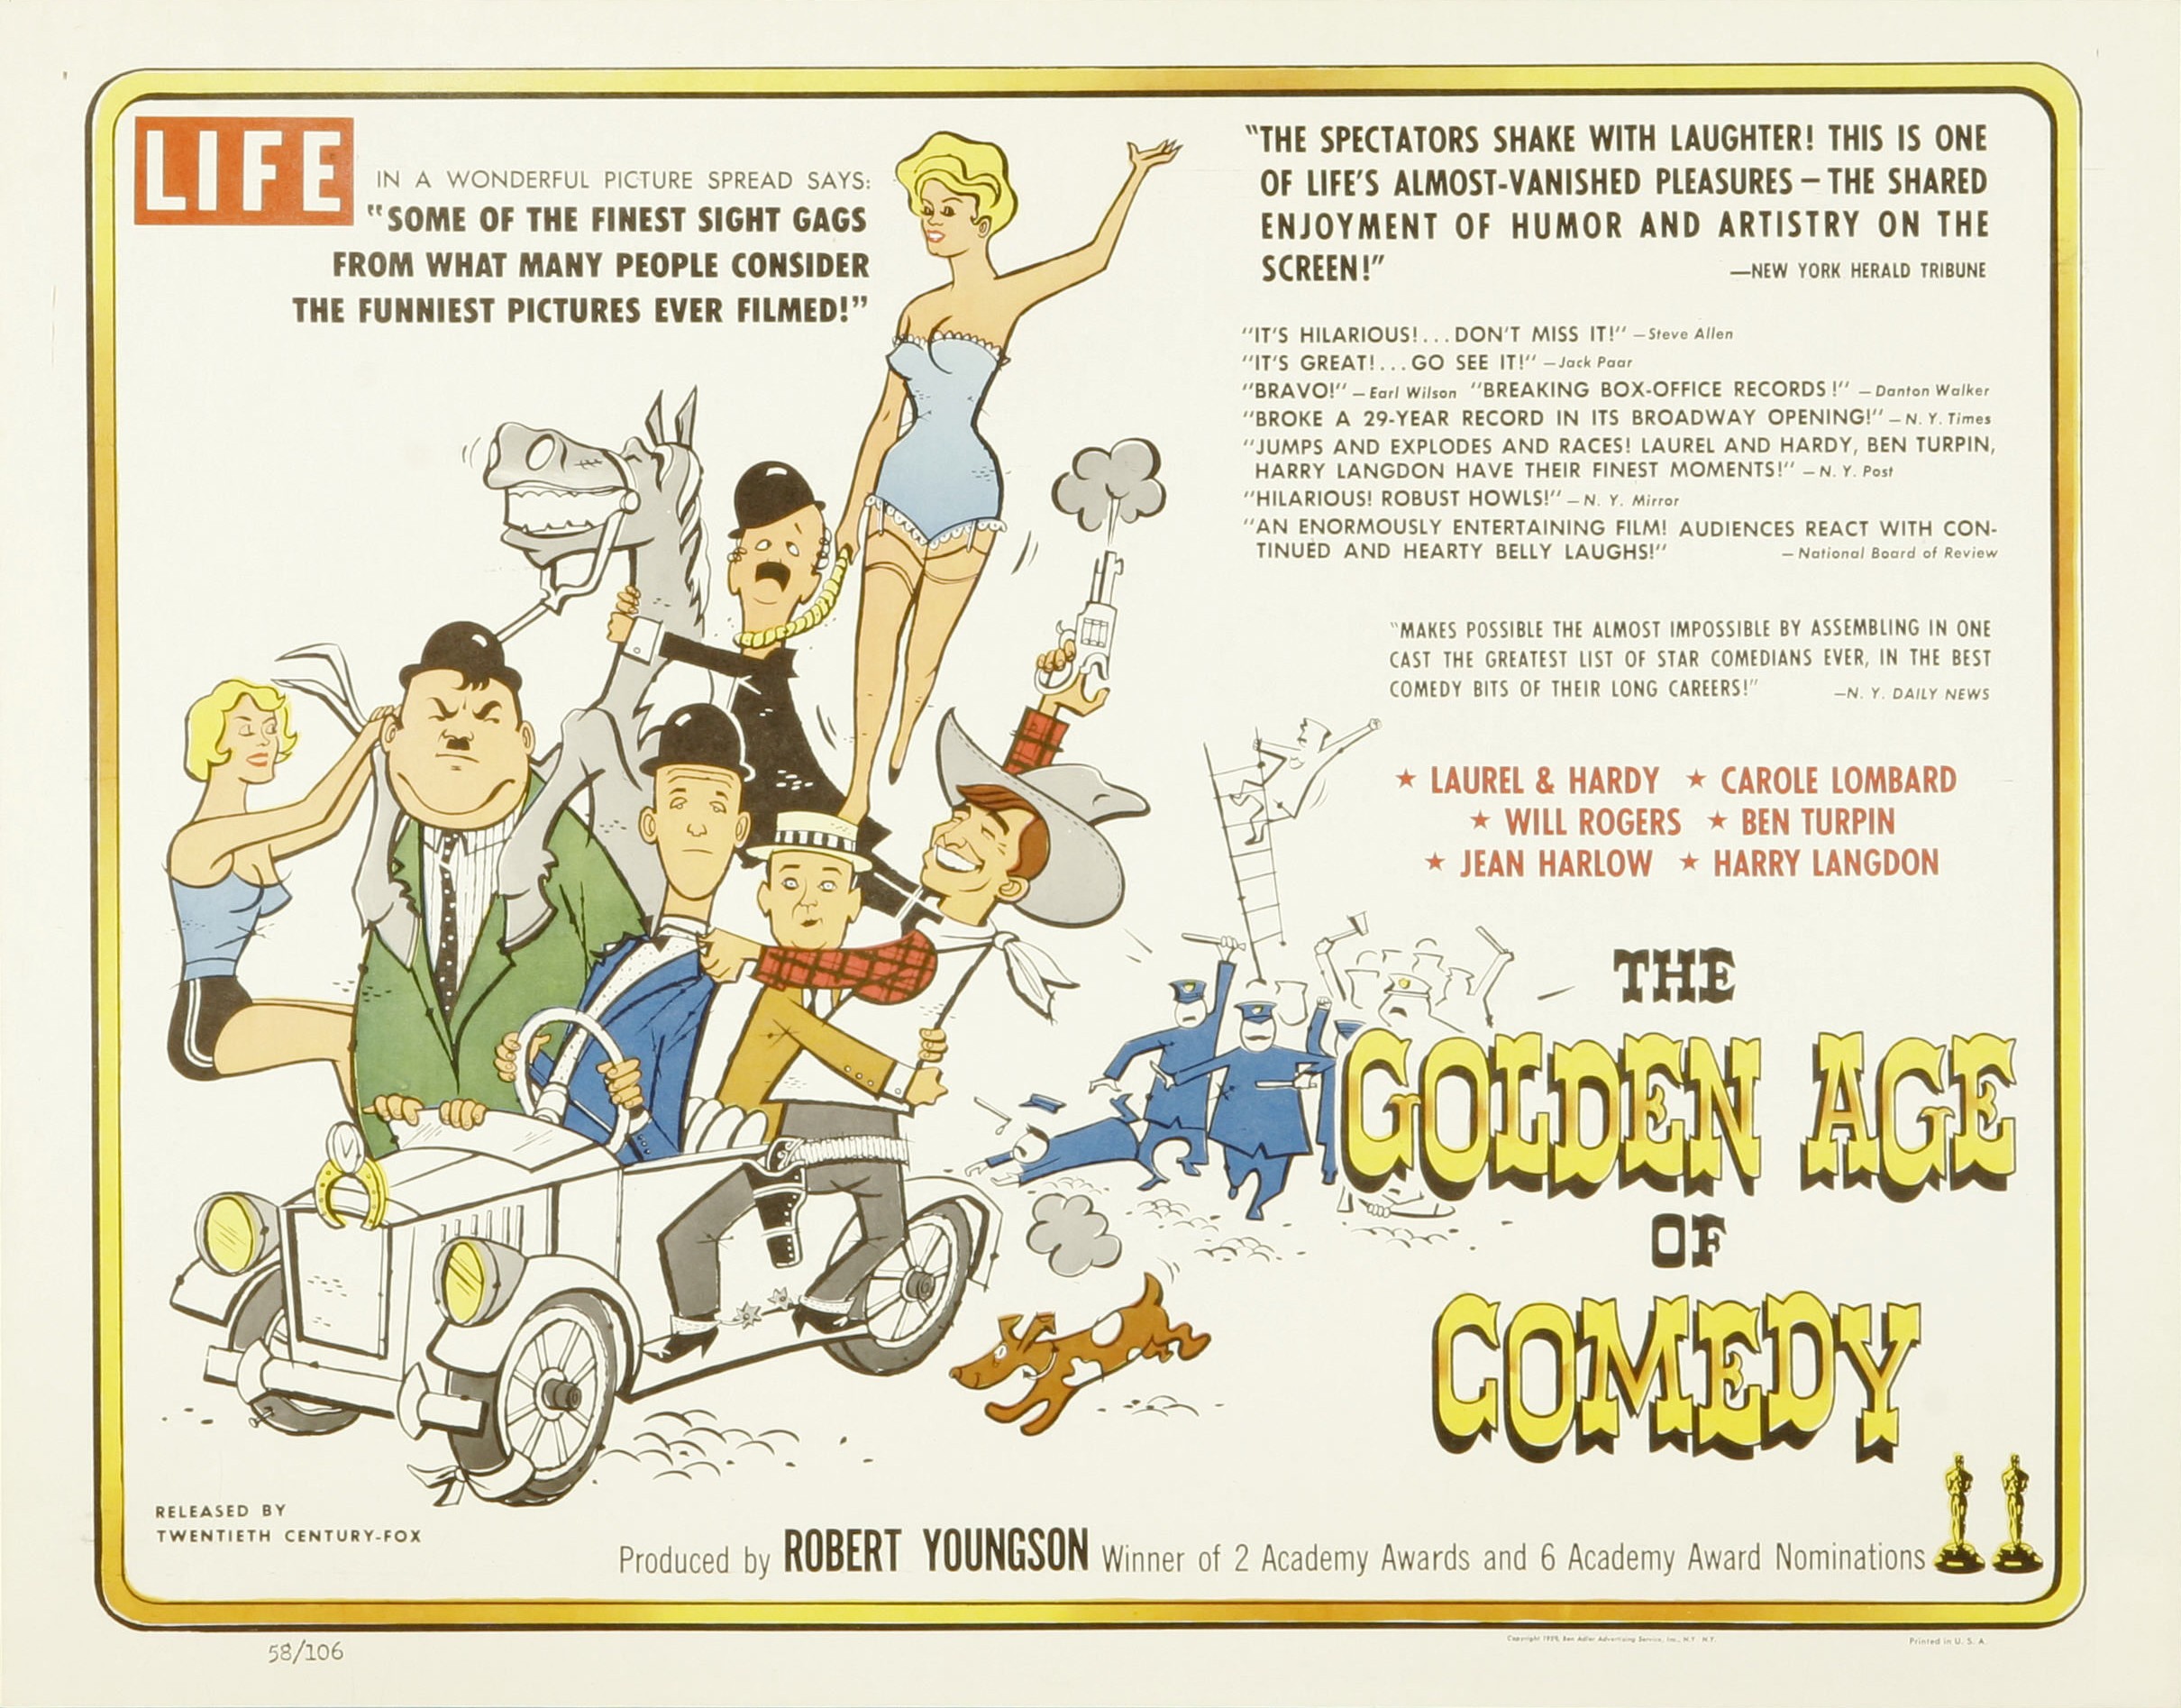 Mega Sized Movie Poster Image for The Golden Age of Comedy (#1 of 2)